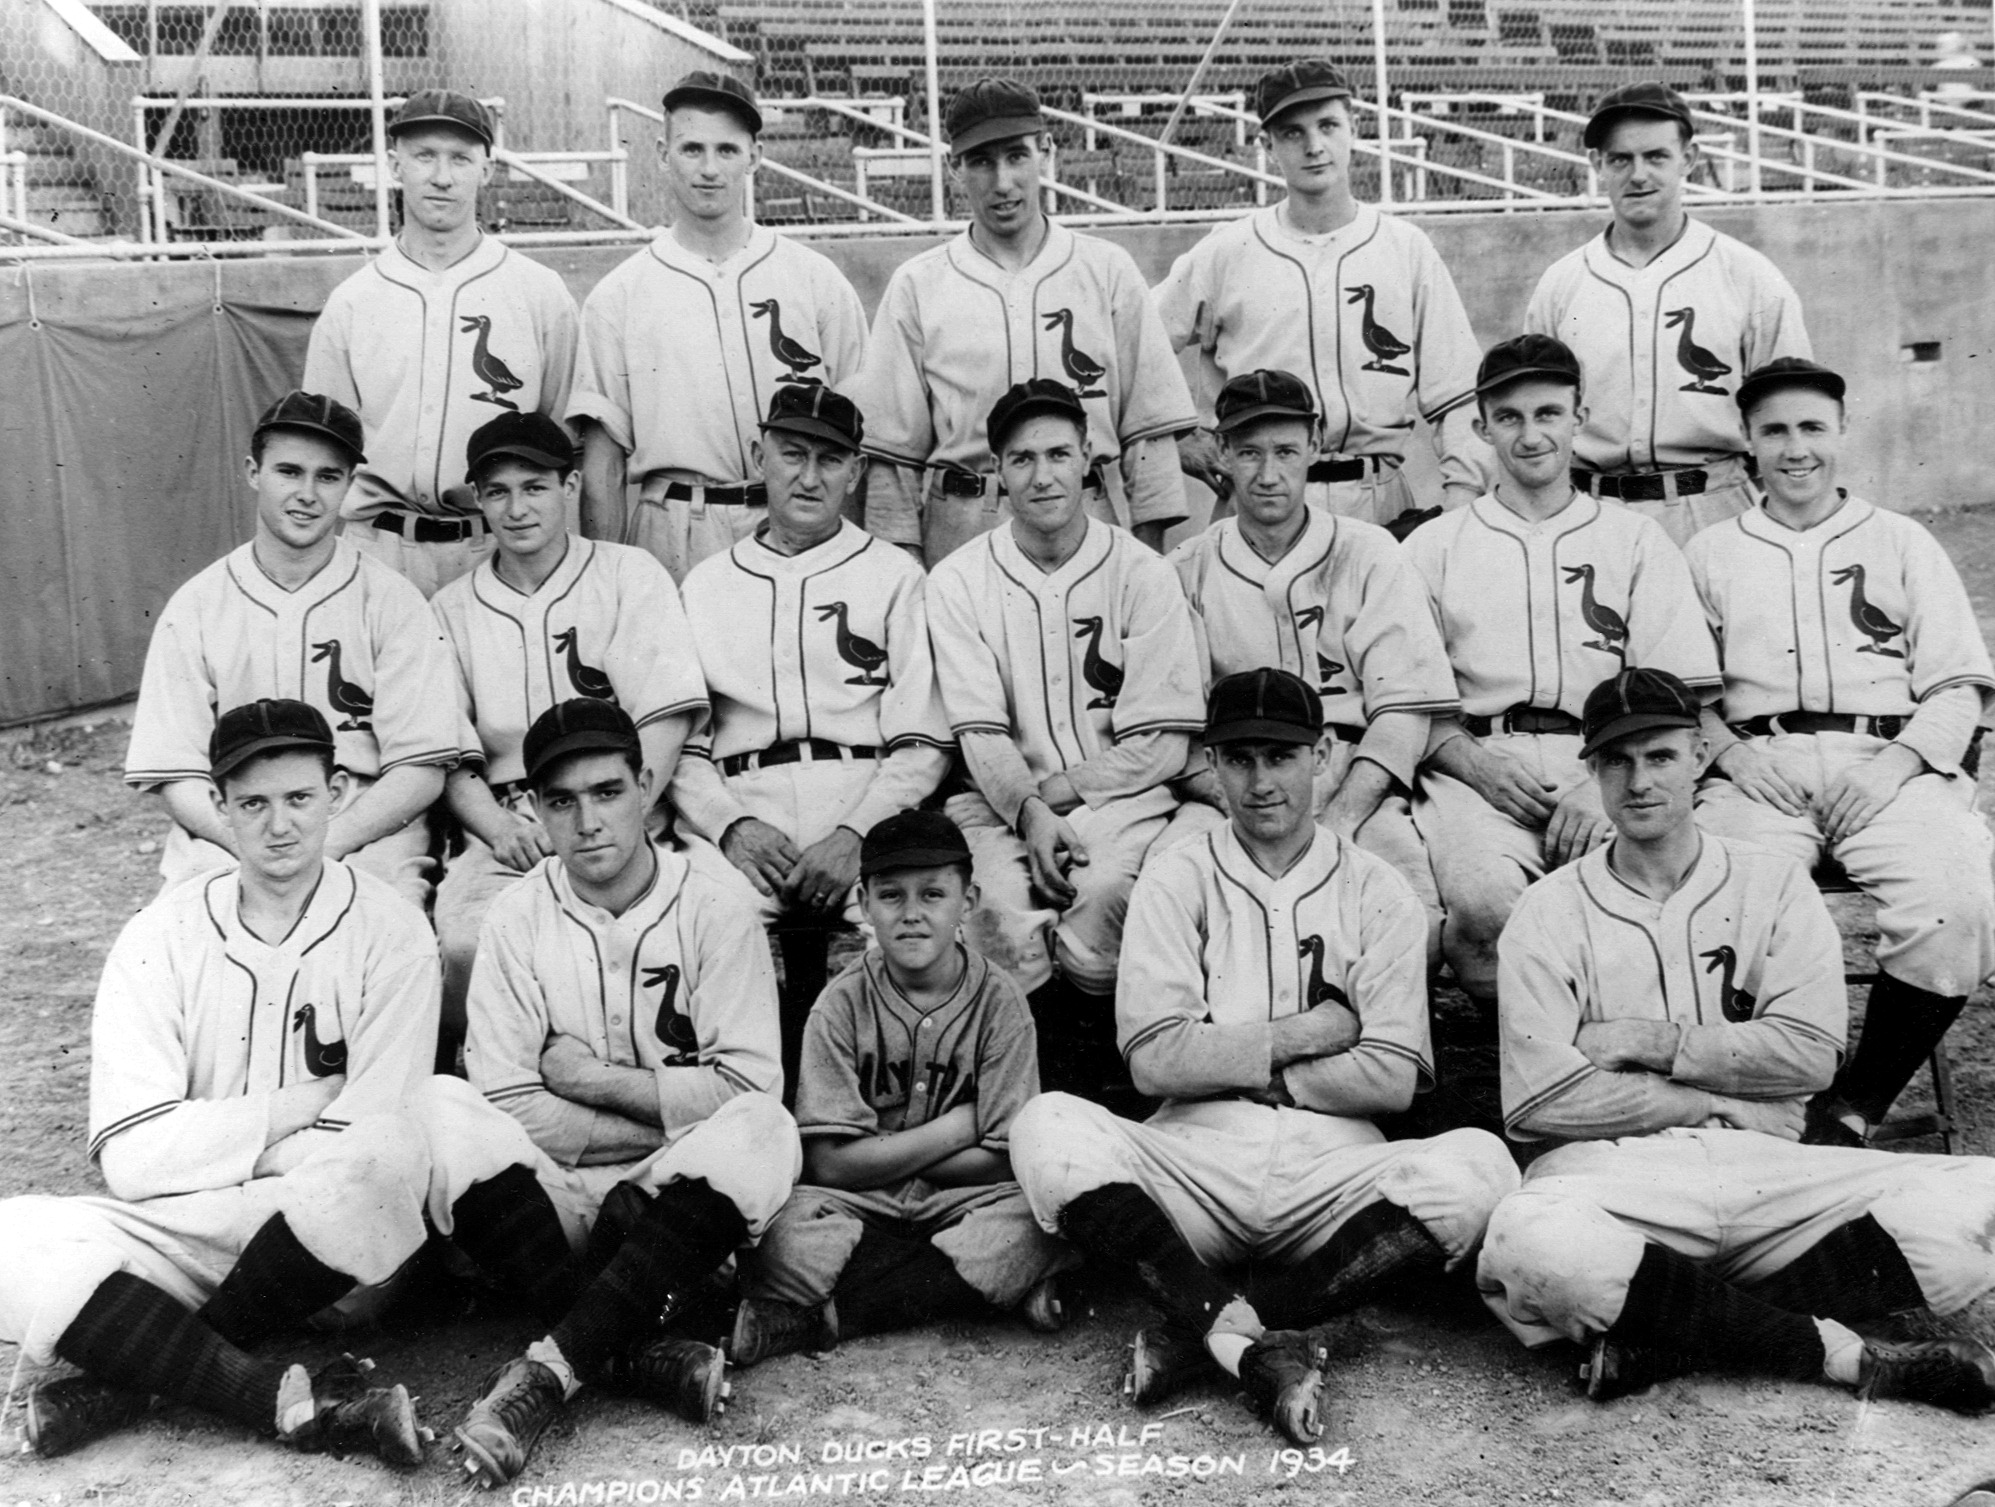 Baseball's history in Dayton: From the 'Gem Citys' of 1884 to the